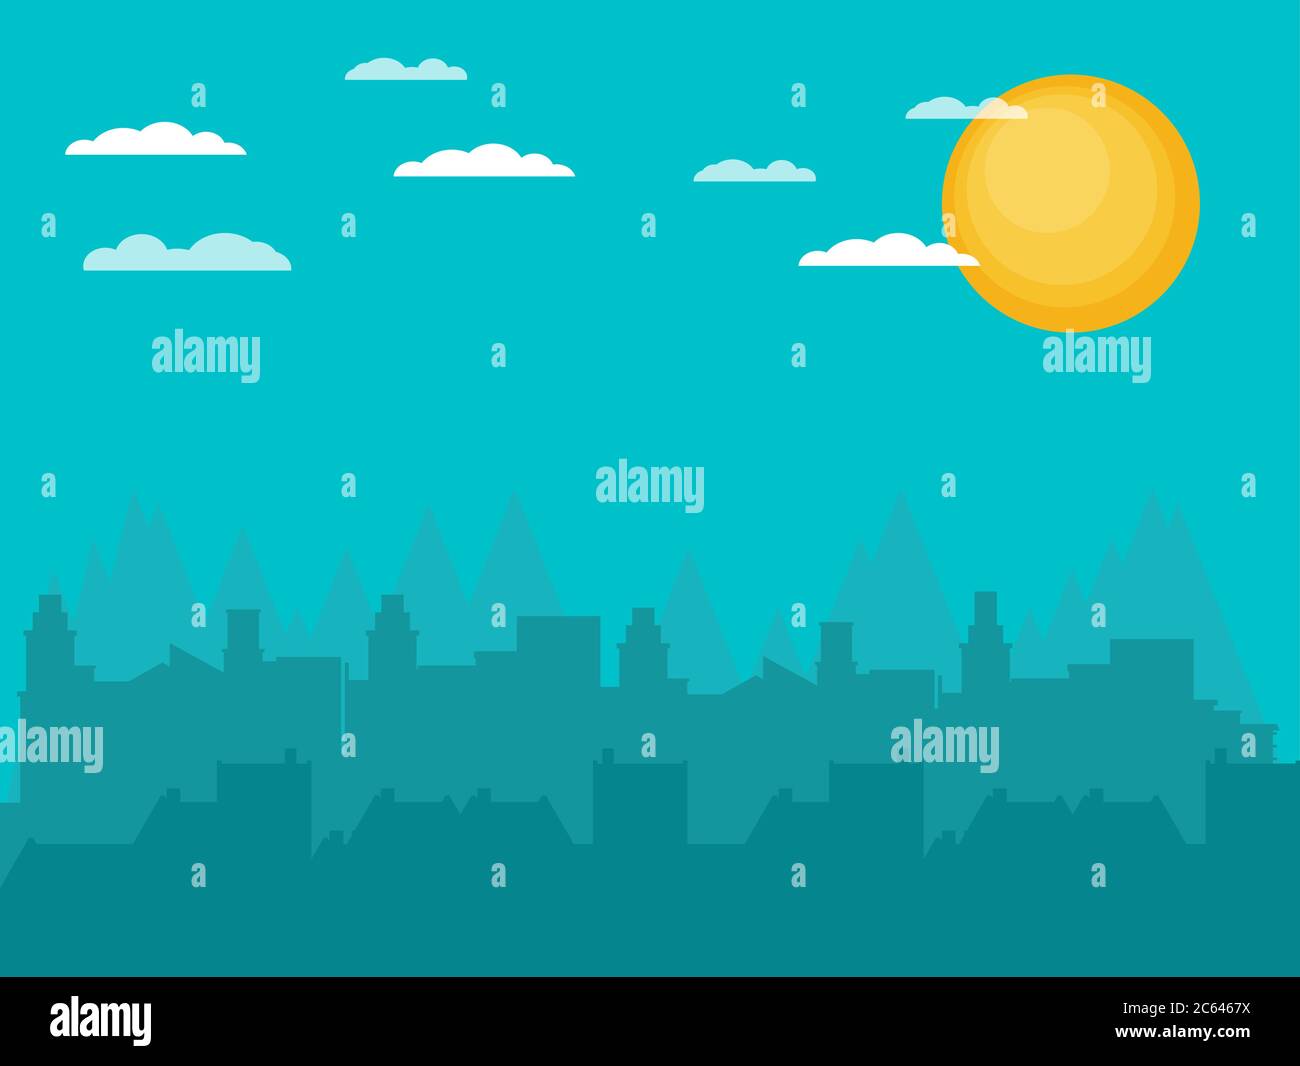 Morning city skyline. Buildings silhouette cityscape with mountains. Big city streets. Stock Vector